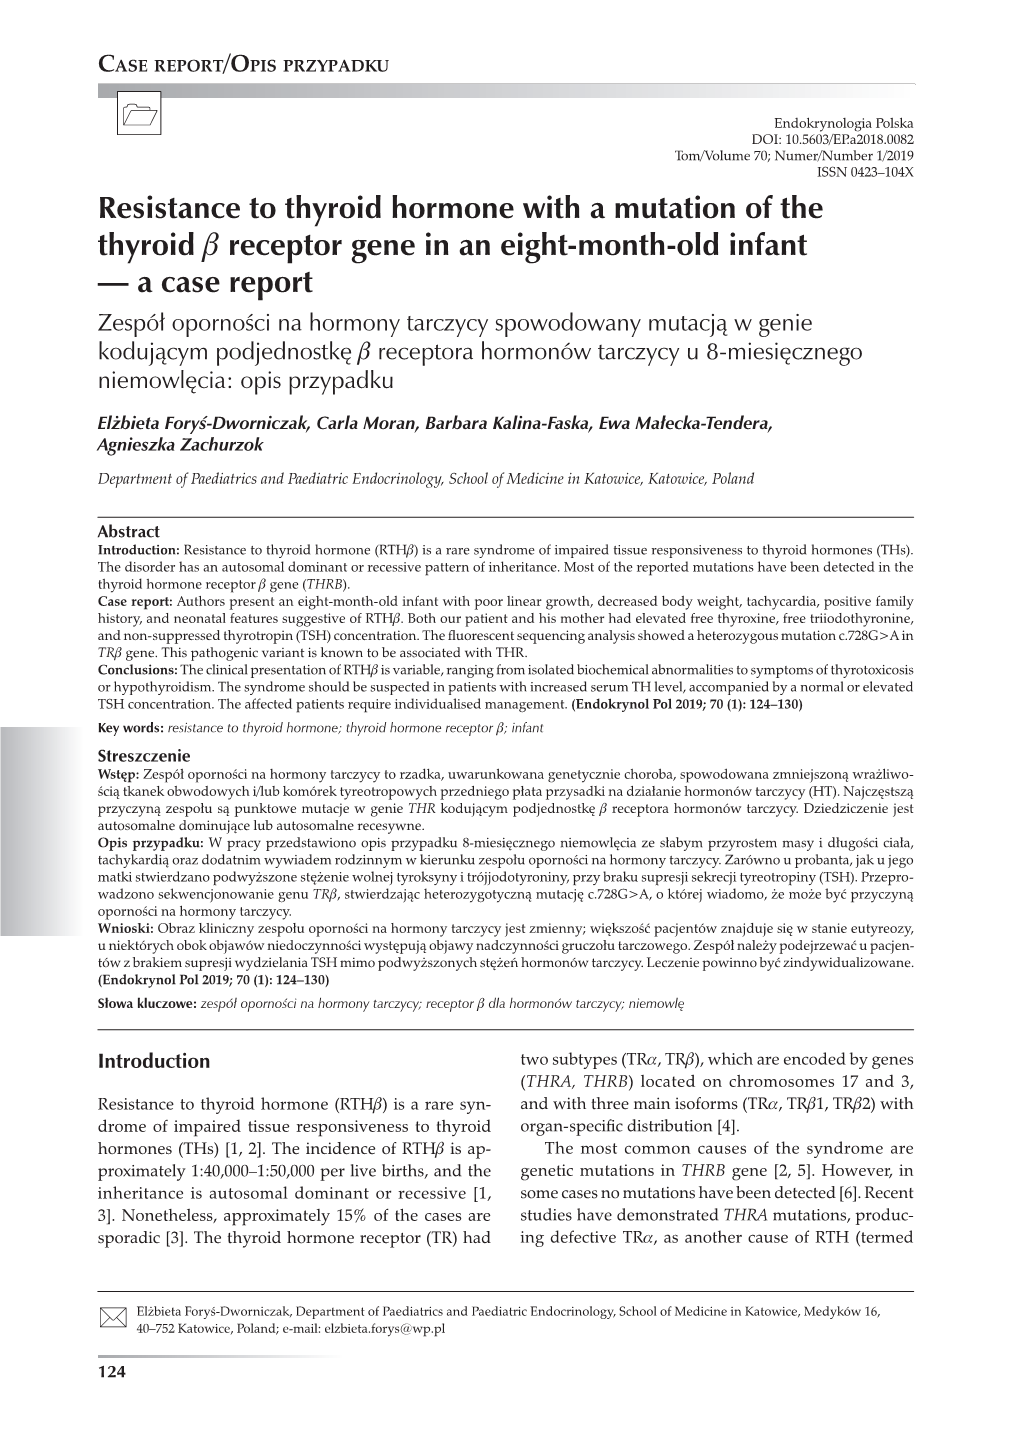 Resistance to Thyroid Hormone with a Mutation of the Thyroid B Receptor